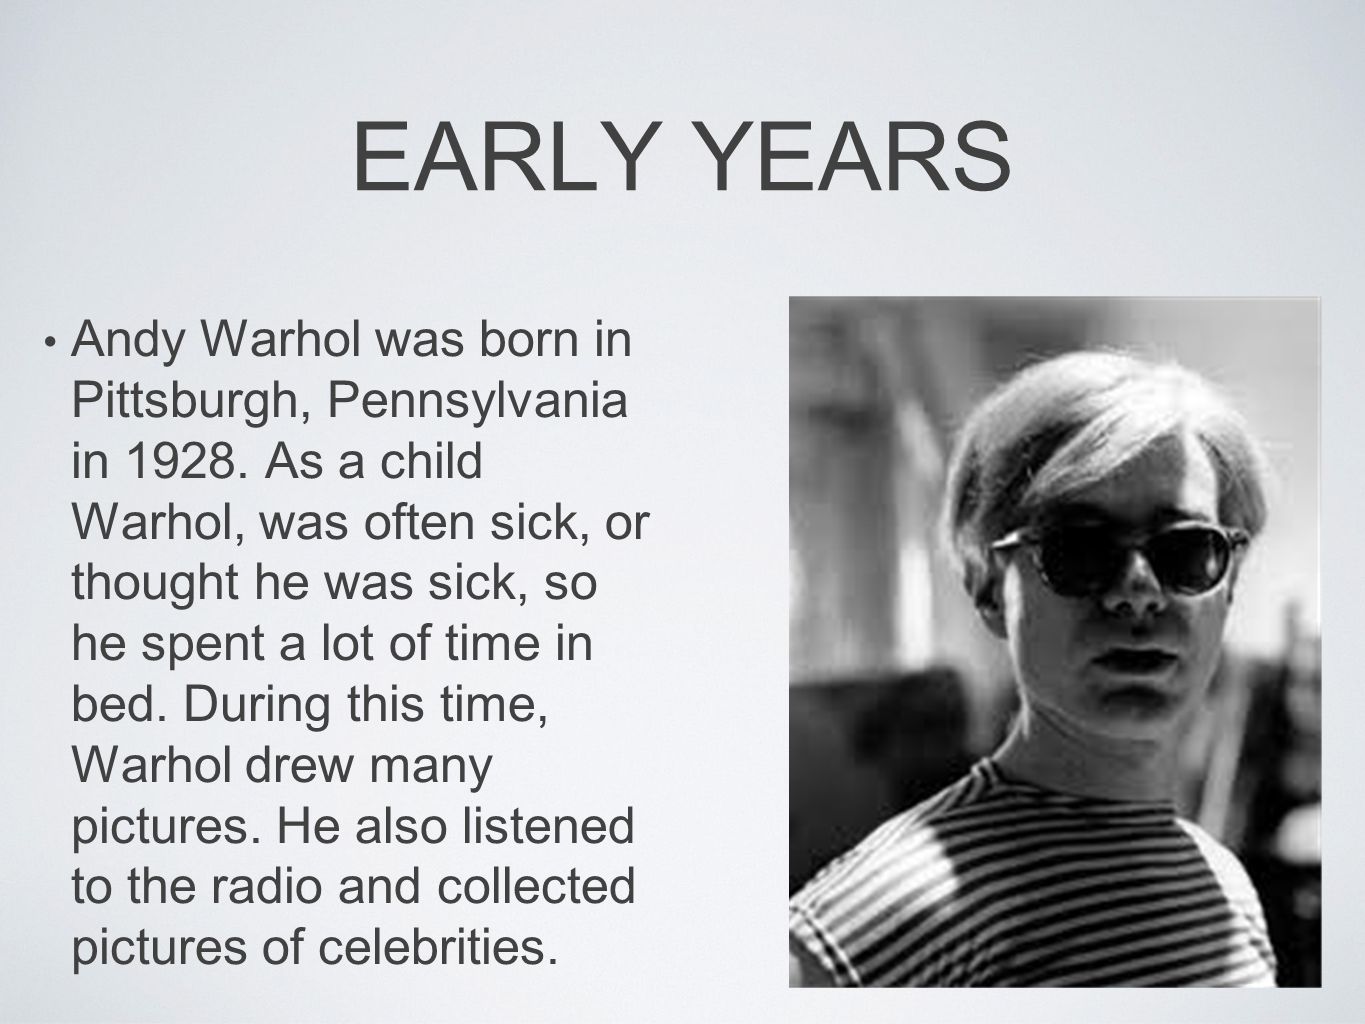 EARLY YEARS Andy Warhol was born in Pittsburgh, Pennsylvania in 1928.